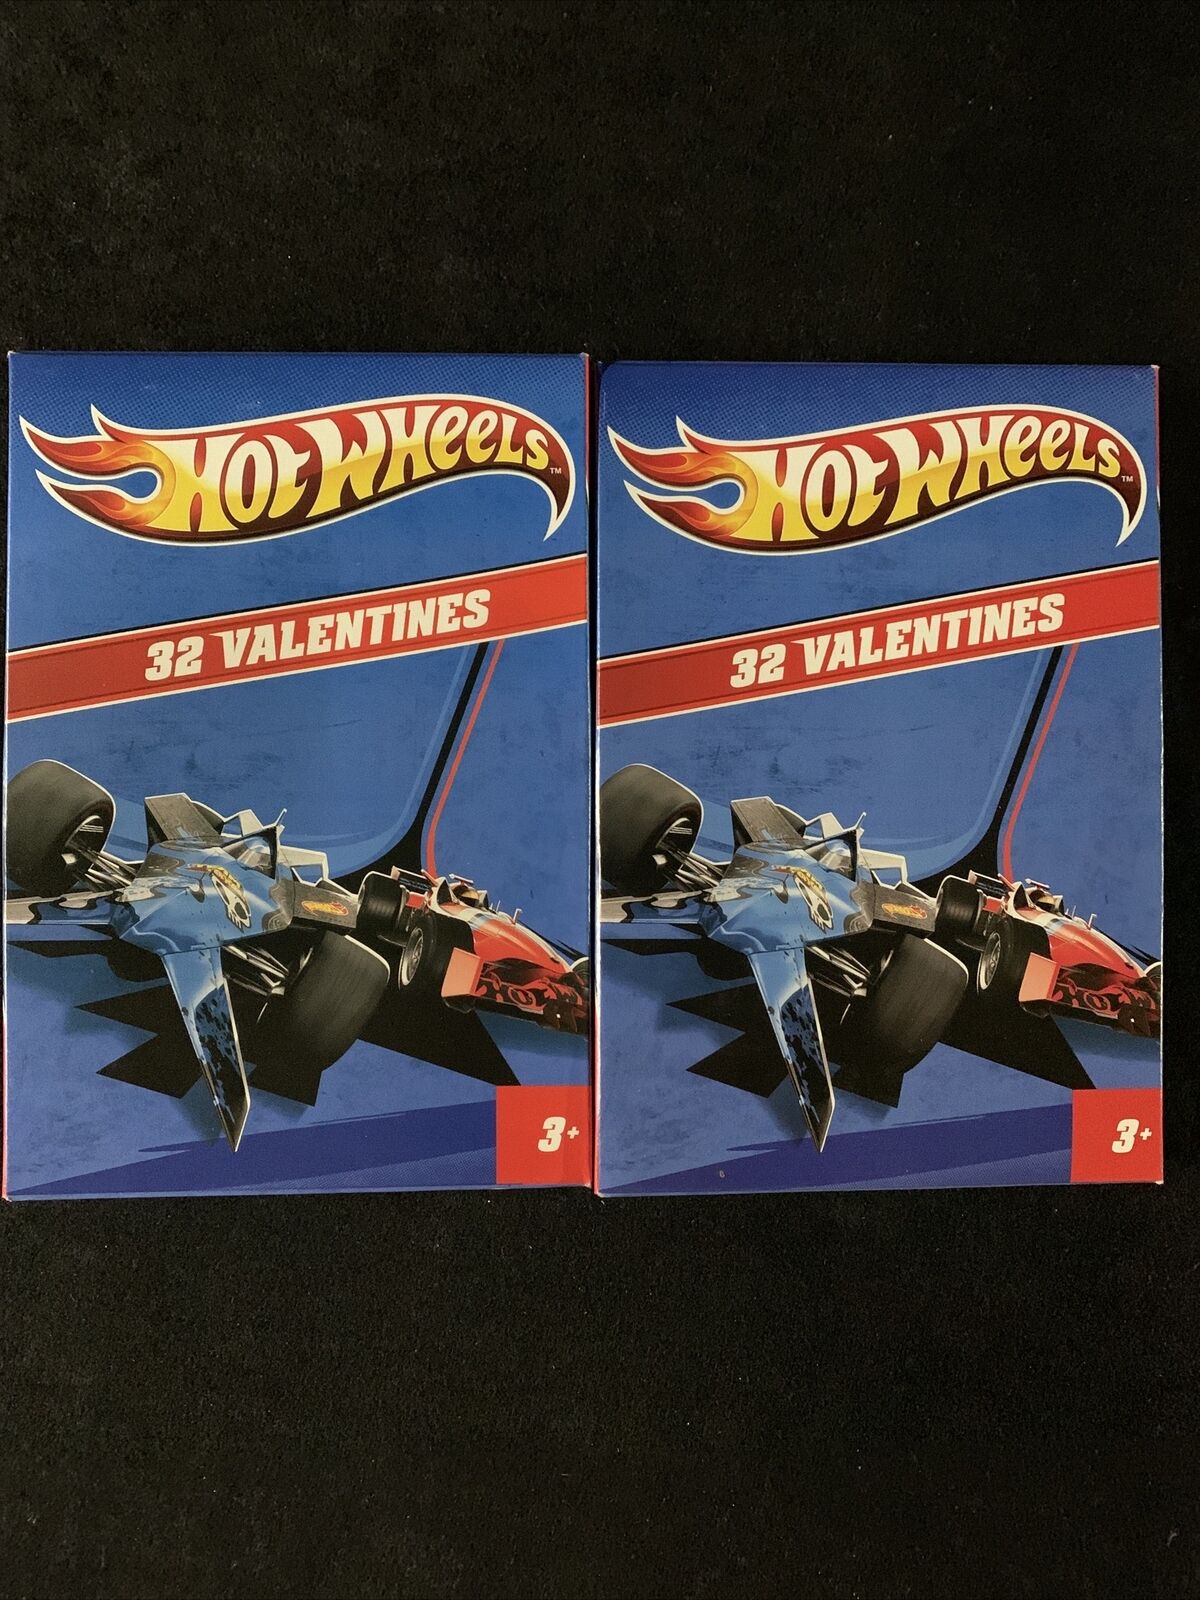 LOT OF 2 Boxes  - HOT WHEELS Valentines Day Exchange Cards. 32ct. Each. 2013 USA